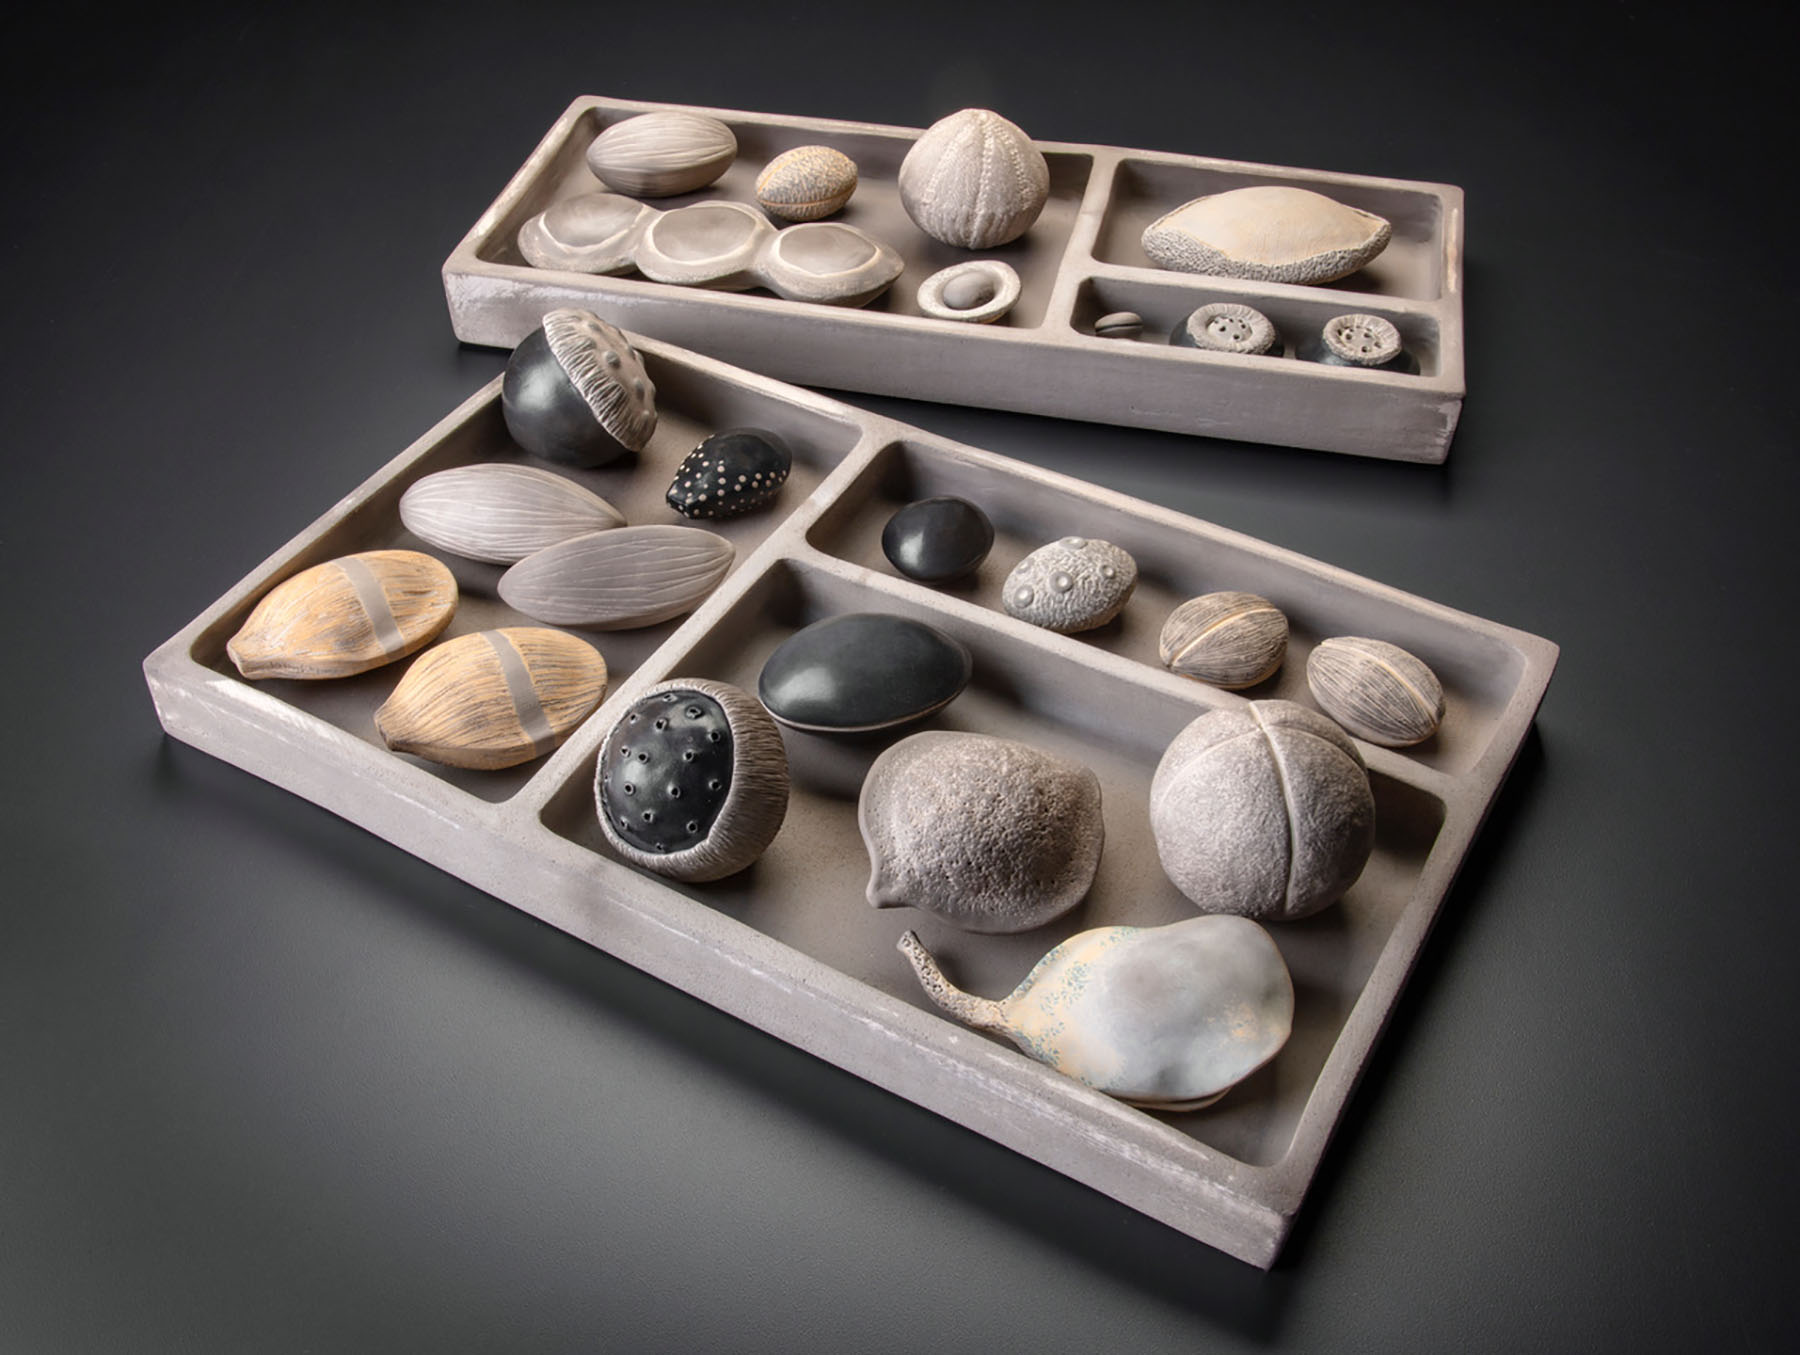 Paula Shalan, Seed Pods (2020). Ceramic. Dimensions: Specimen trays: 3” h x 18” w x 7.5” d and 3” h x 17.5” w x 10.5” d. ©Paula Shalan 2020. Courtesy of the artist.